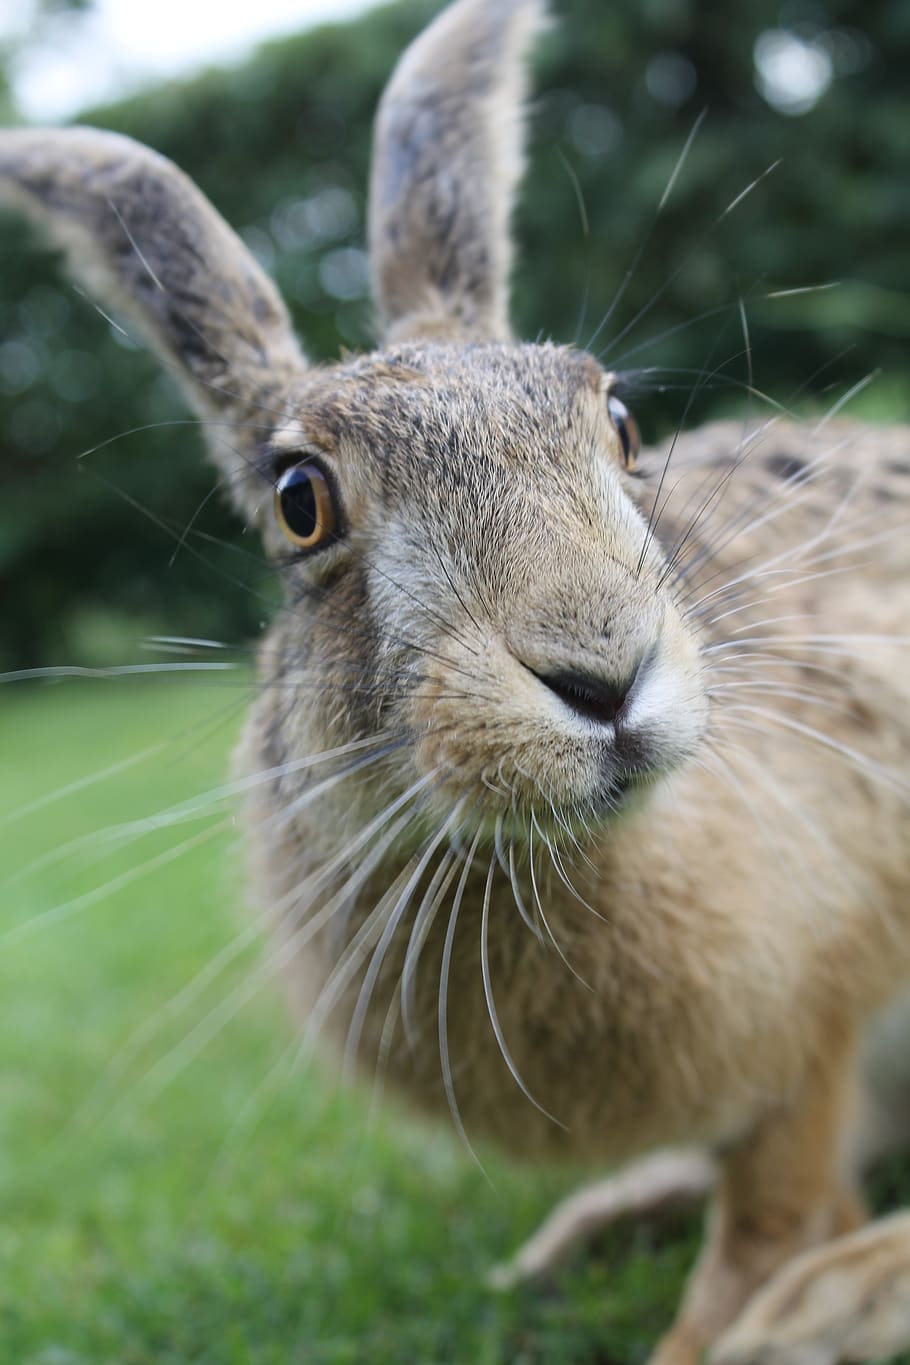 european brown hare, young hare, france, inquisitive hare, mammal, animal themes, animal, one animal, close-up, vertebrate